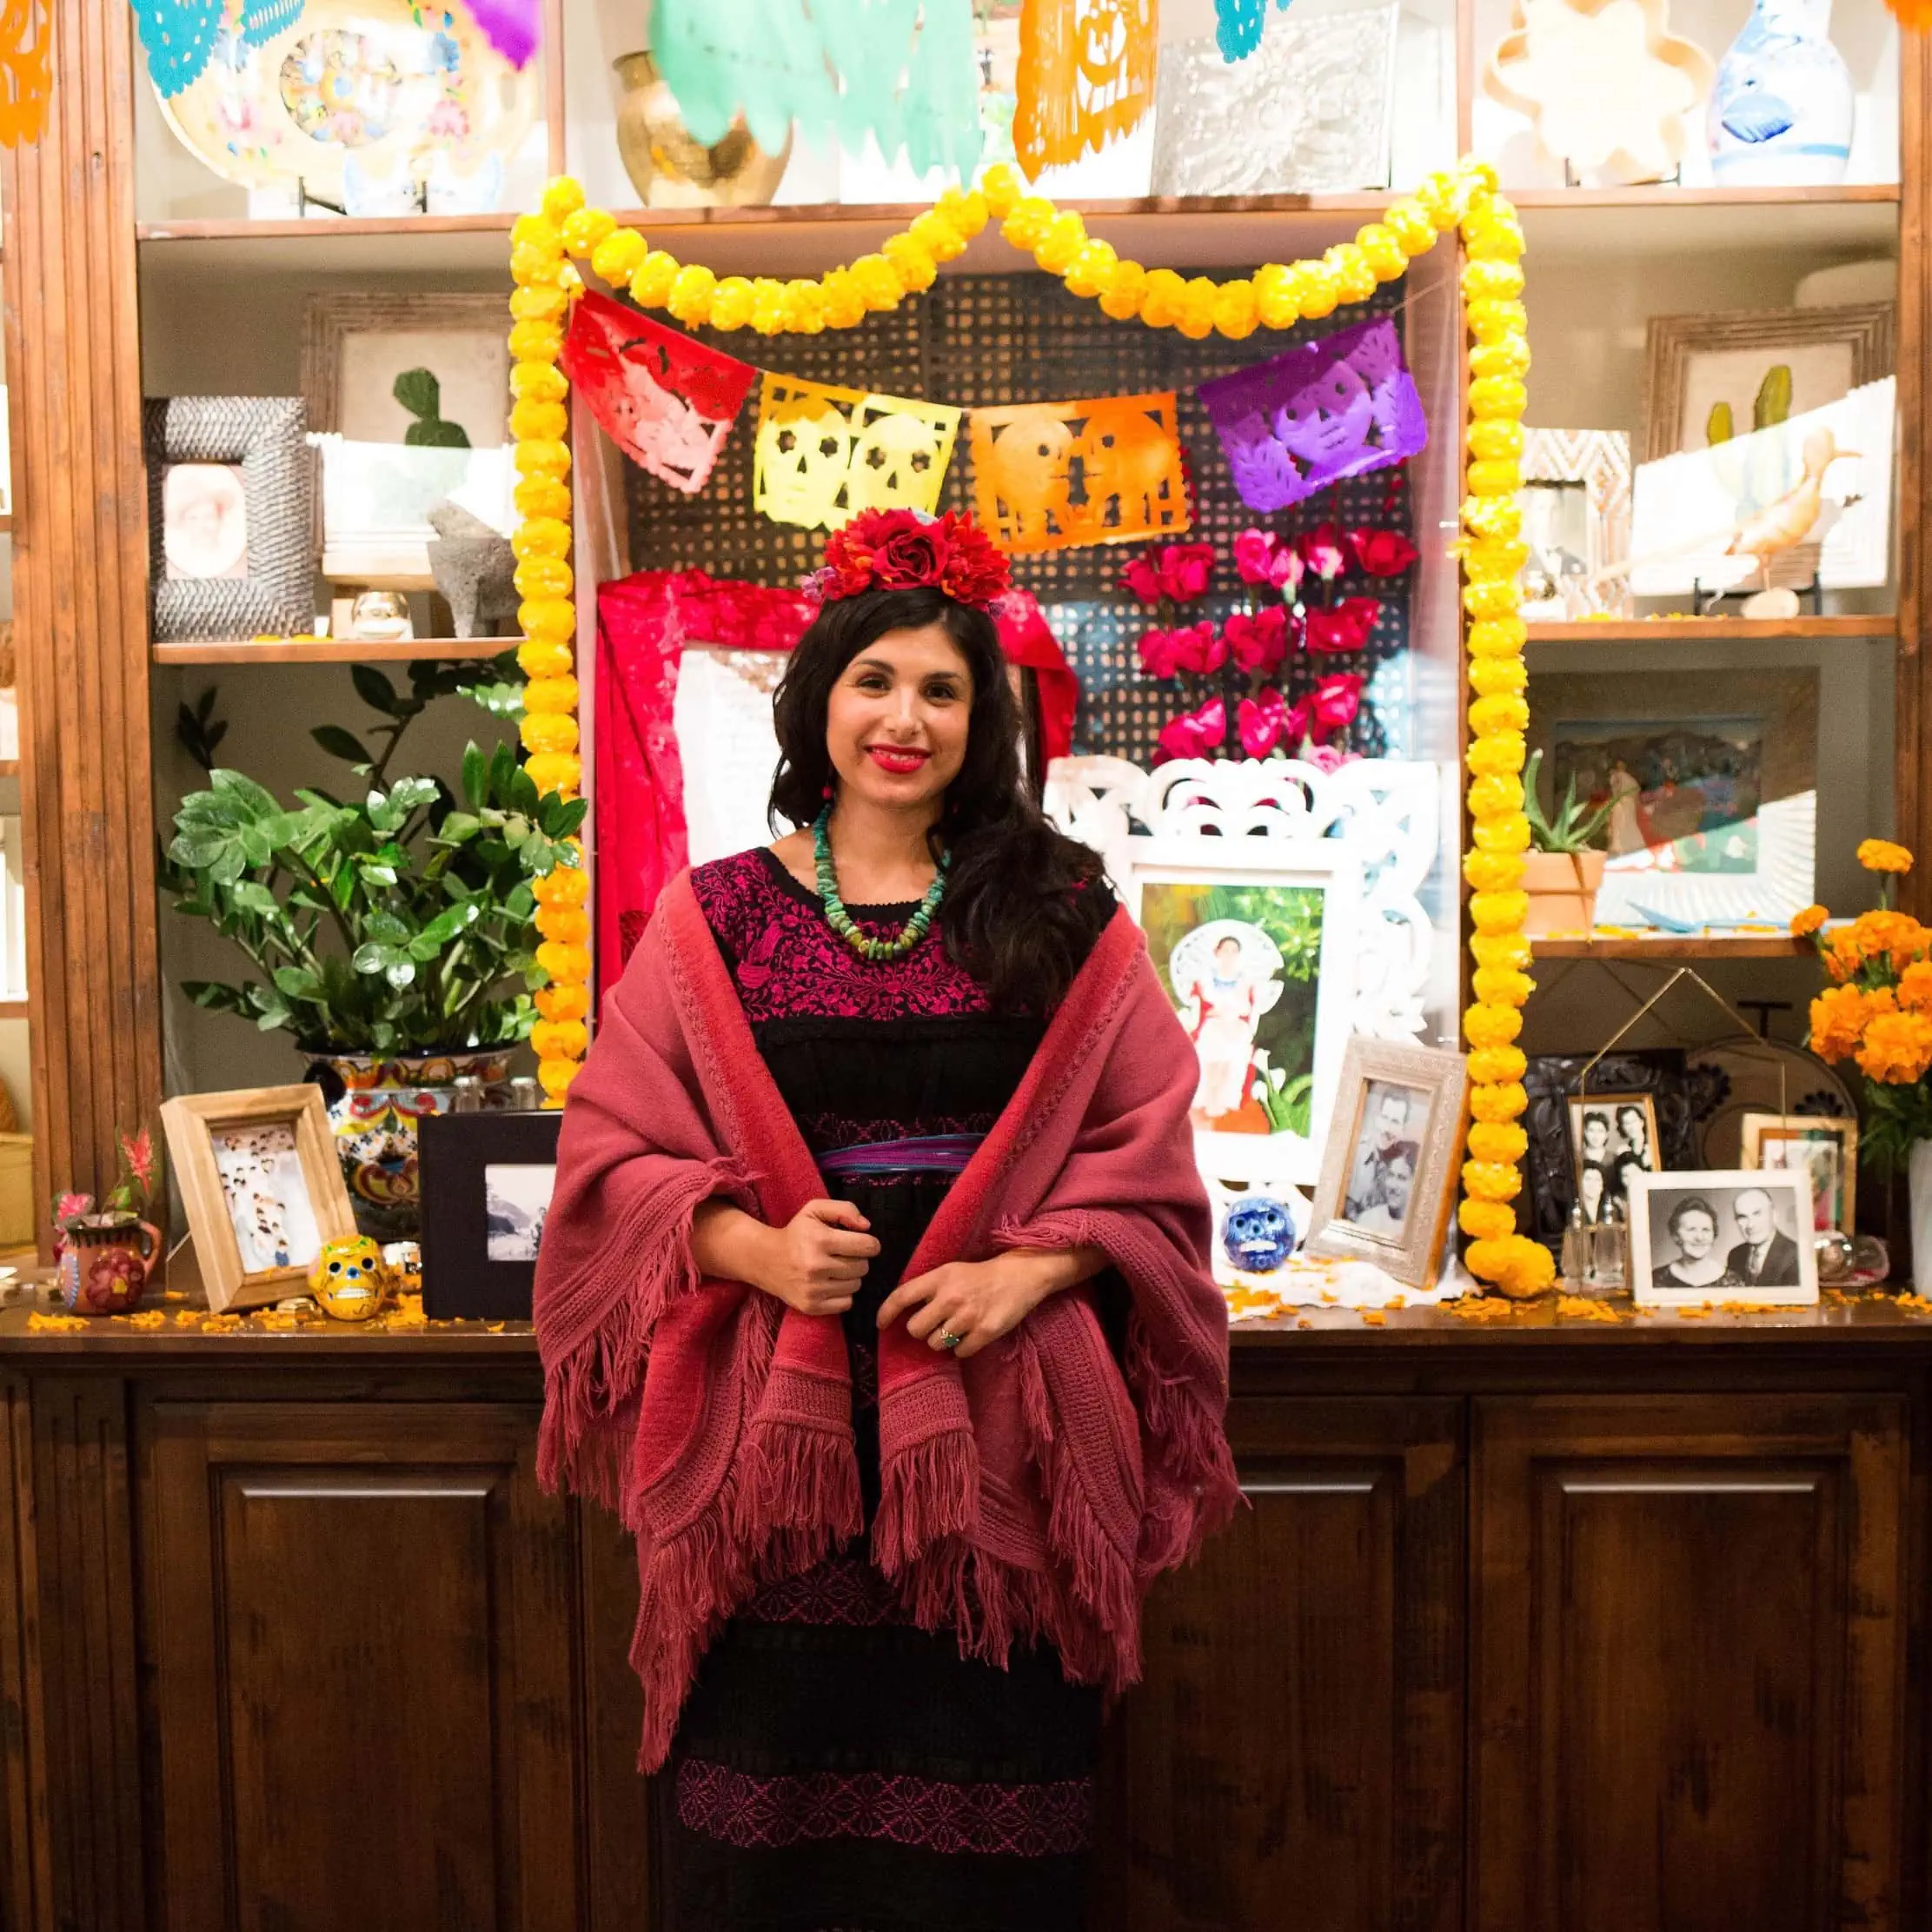 Michelle is wearing a red dress and rebozo. She has red flowers in her hair and she's standing in front of a Dia de los Muertos ofrenda. 